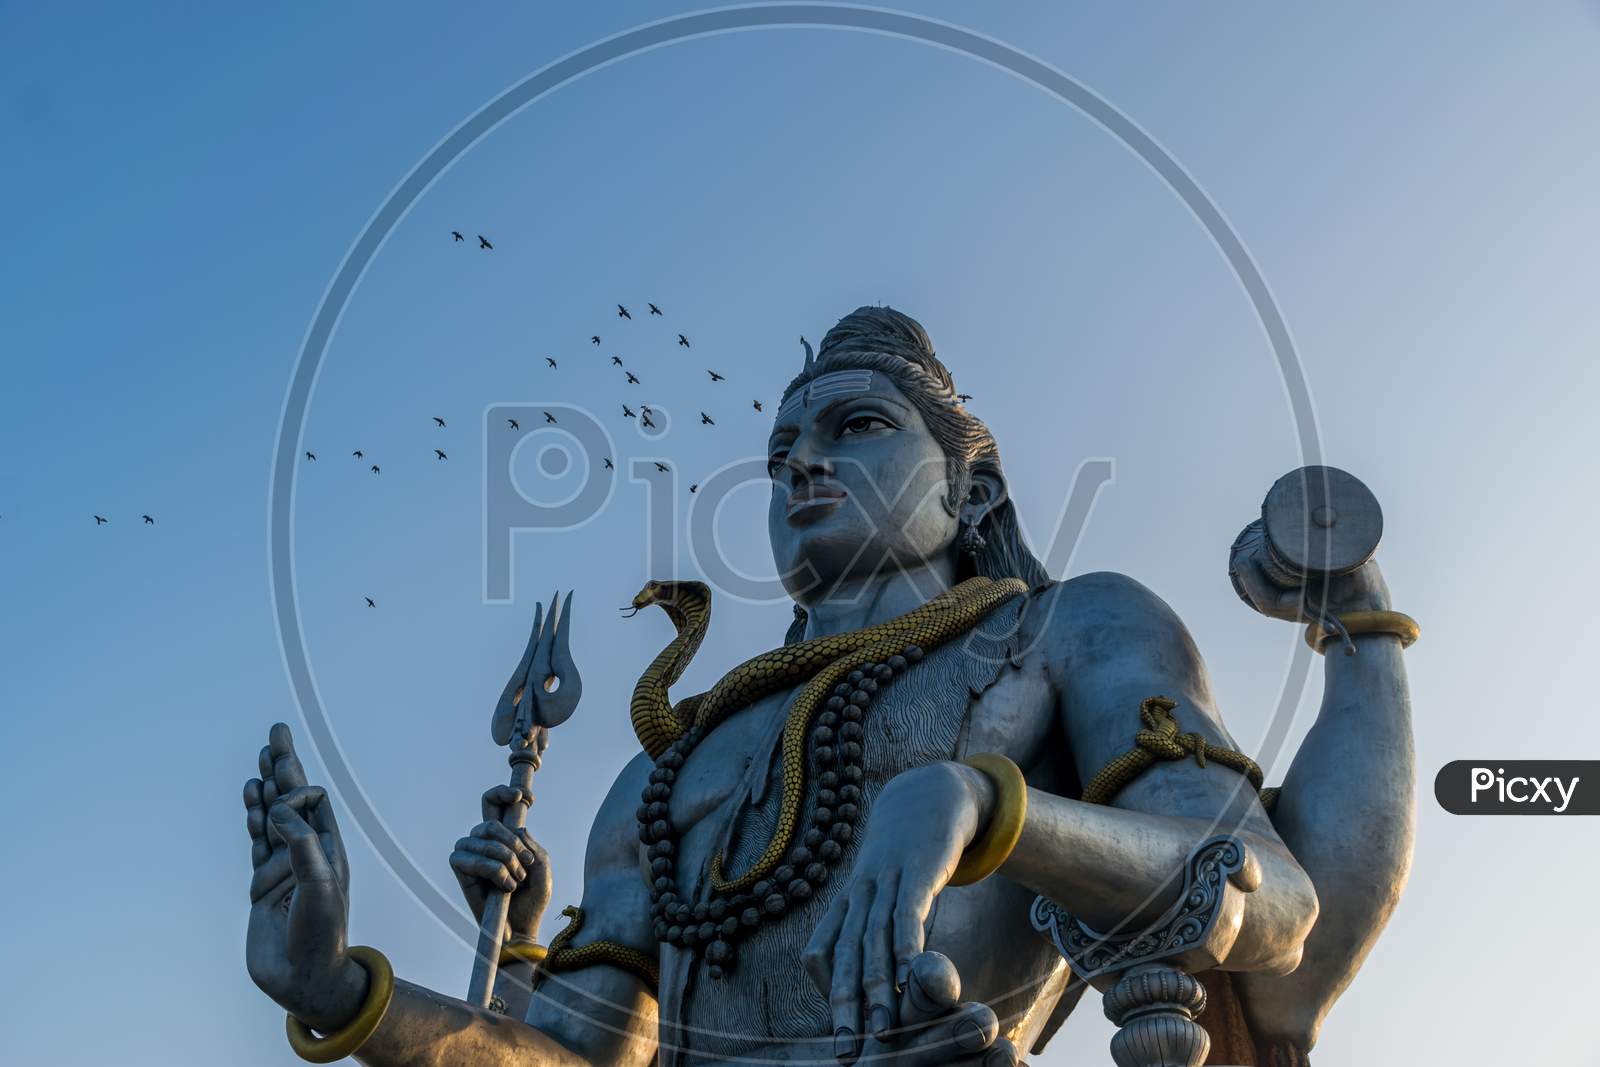 Landscape View Of The Second Tallest Lord Shiva Statue In The World With A Flock Of Flying Birds In Murdeshwar, Karnataka, India